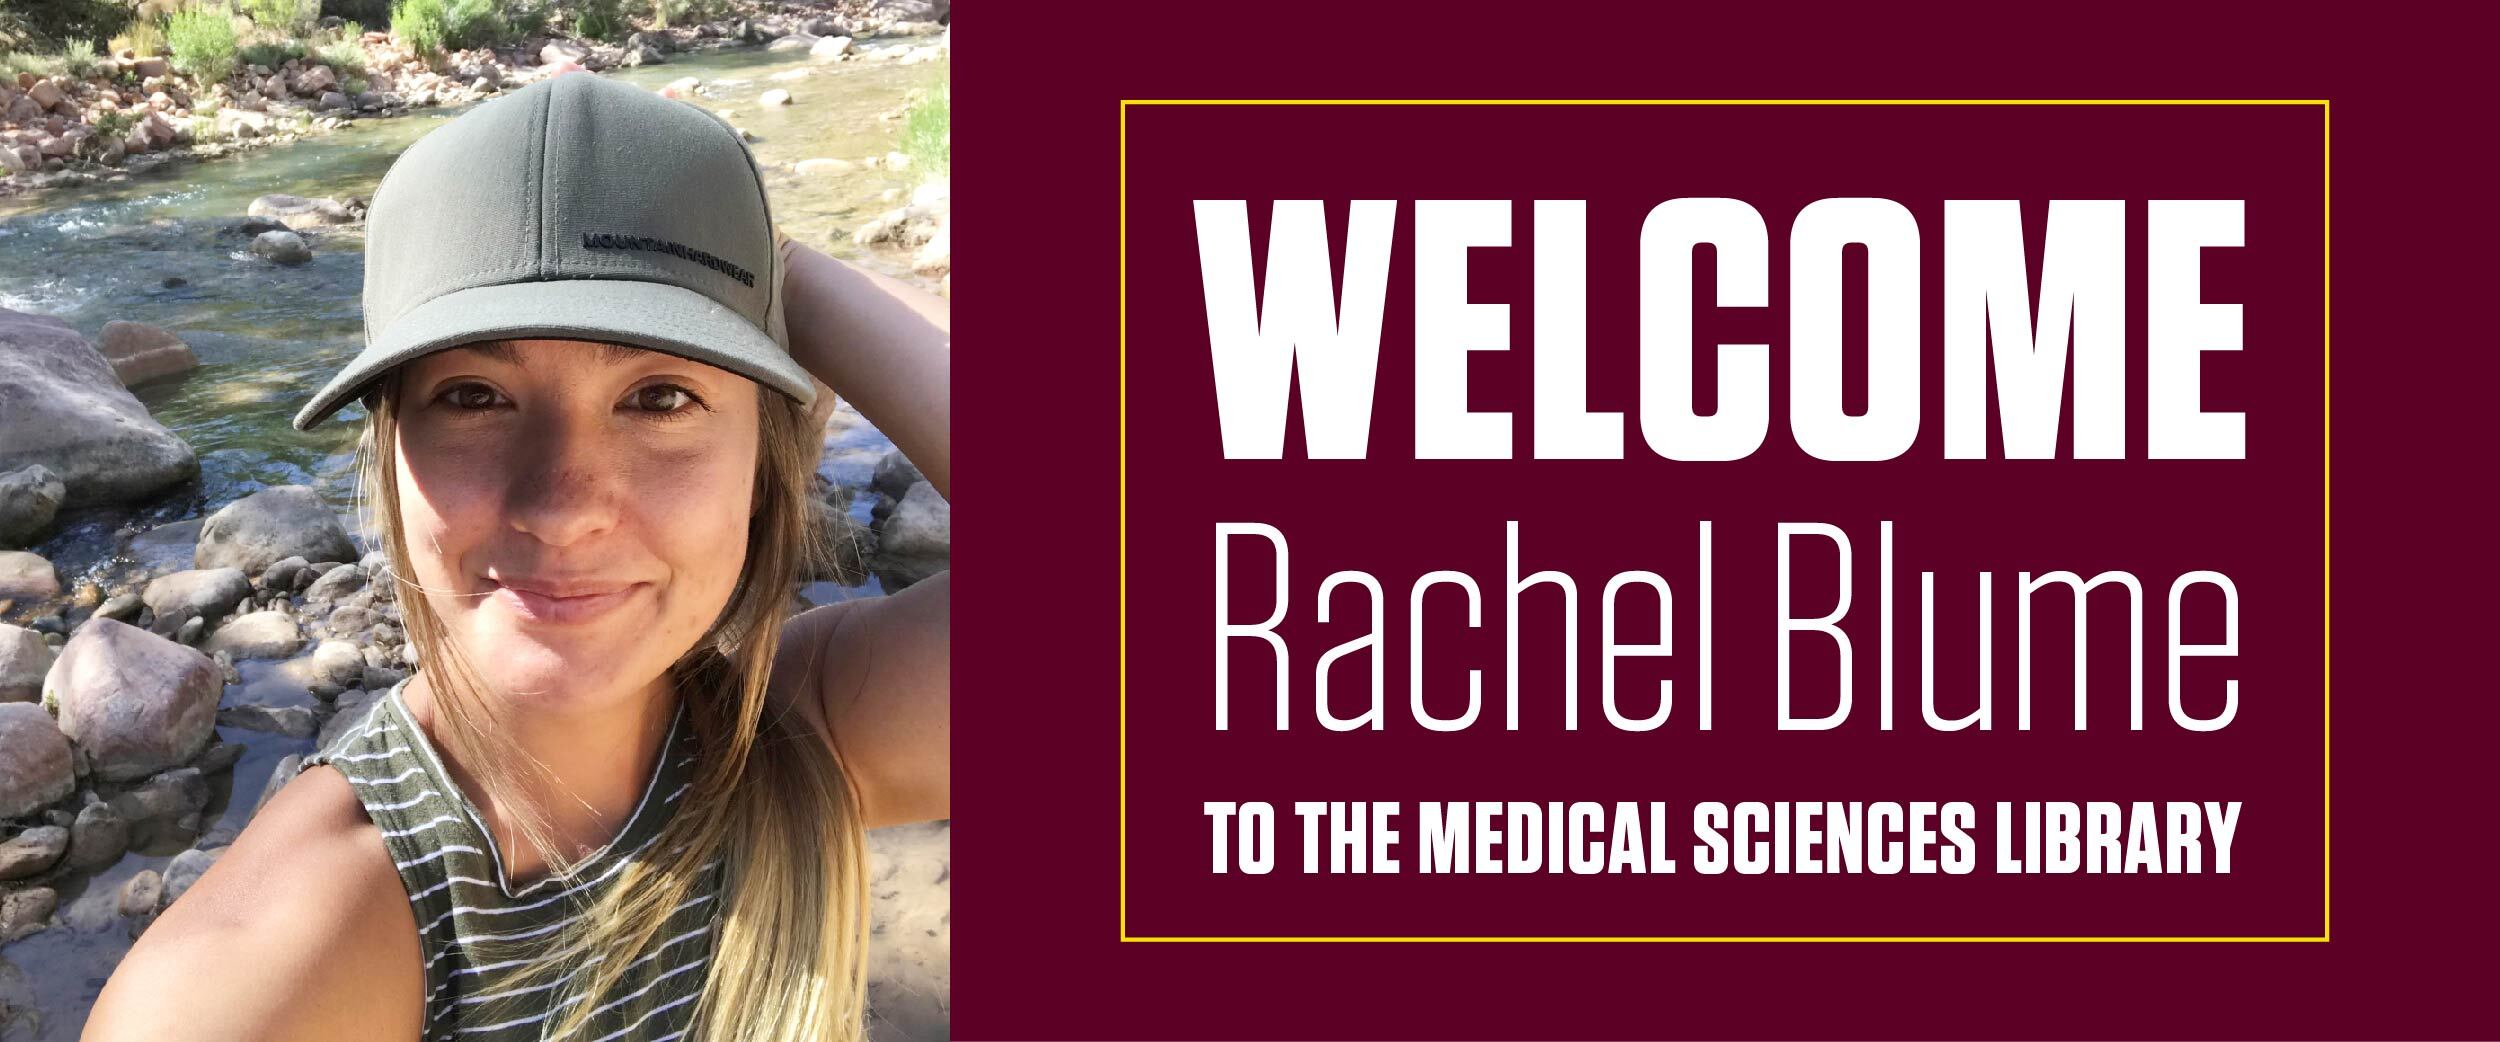 Welcome Rachel Blume to the Medical Sciences Library